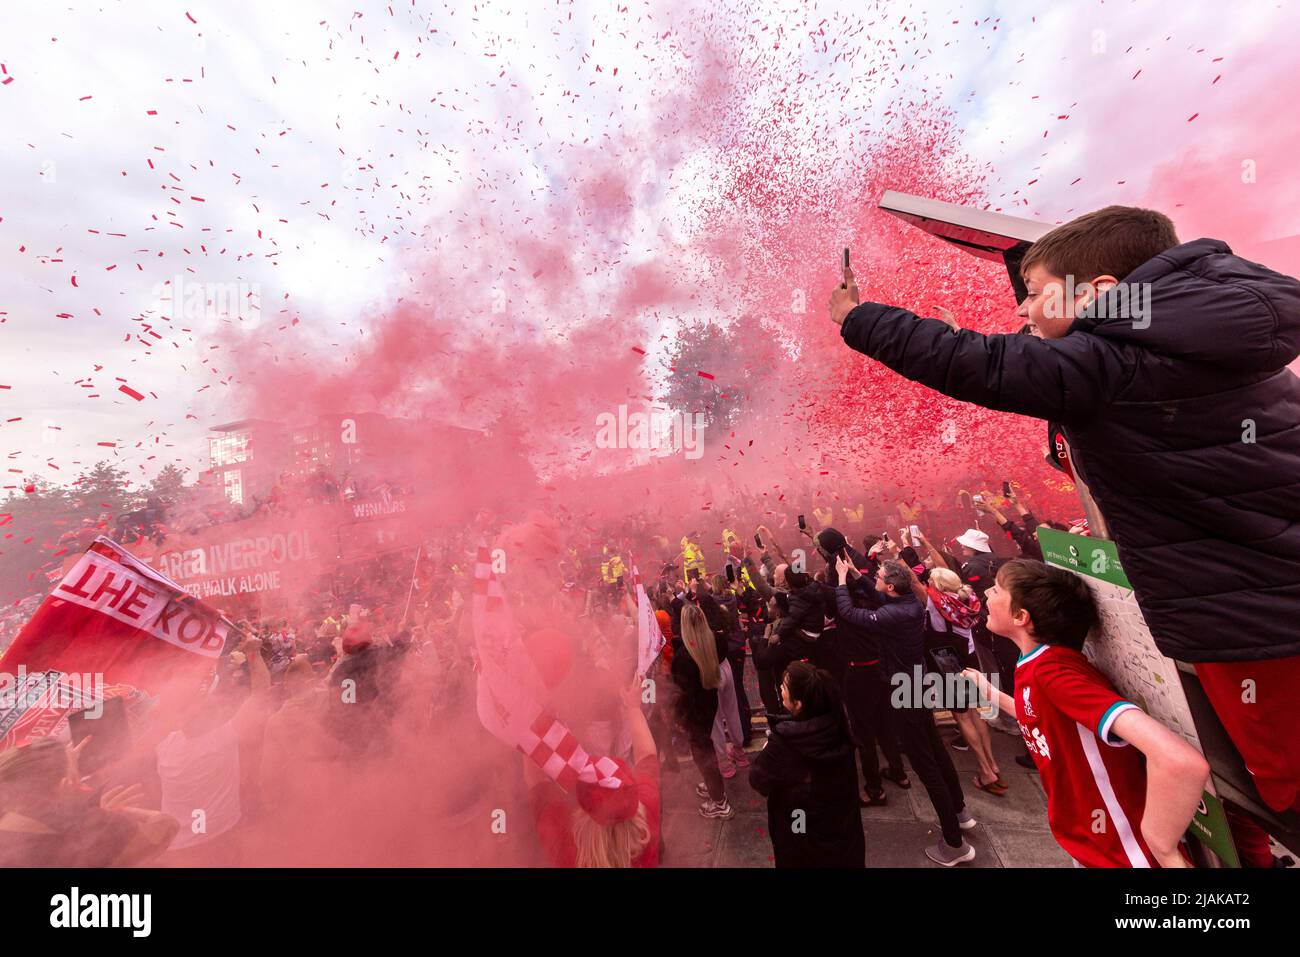 Liverpool Football Club victory parade through the streets of the city celebrating the League Cup and FA Cup trophy wins. Young fans, flare smoke Stock Photo